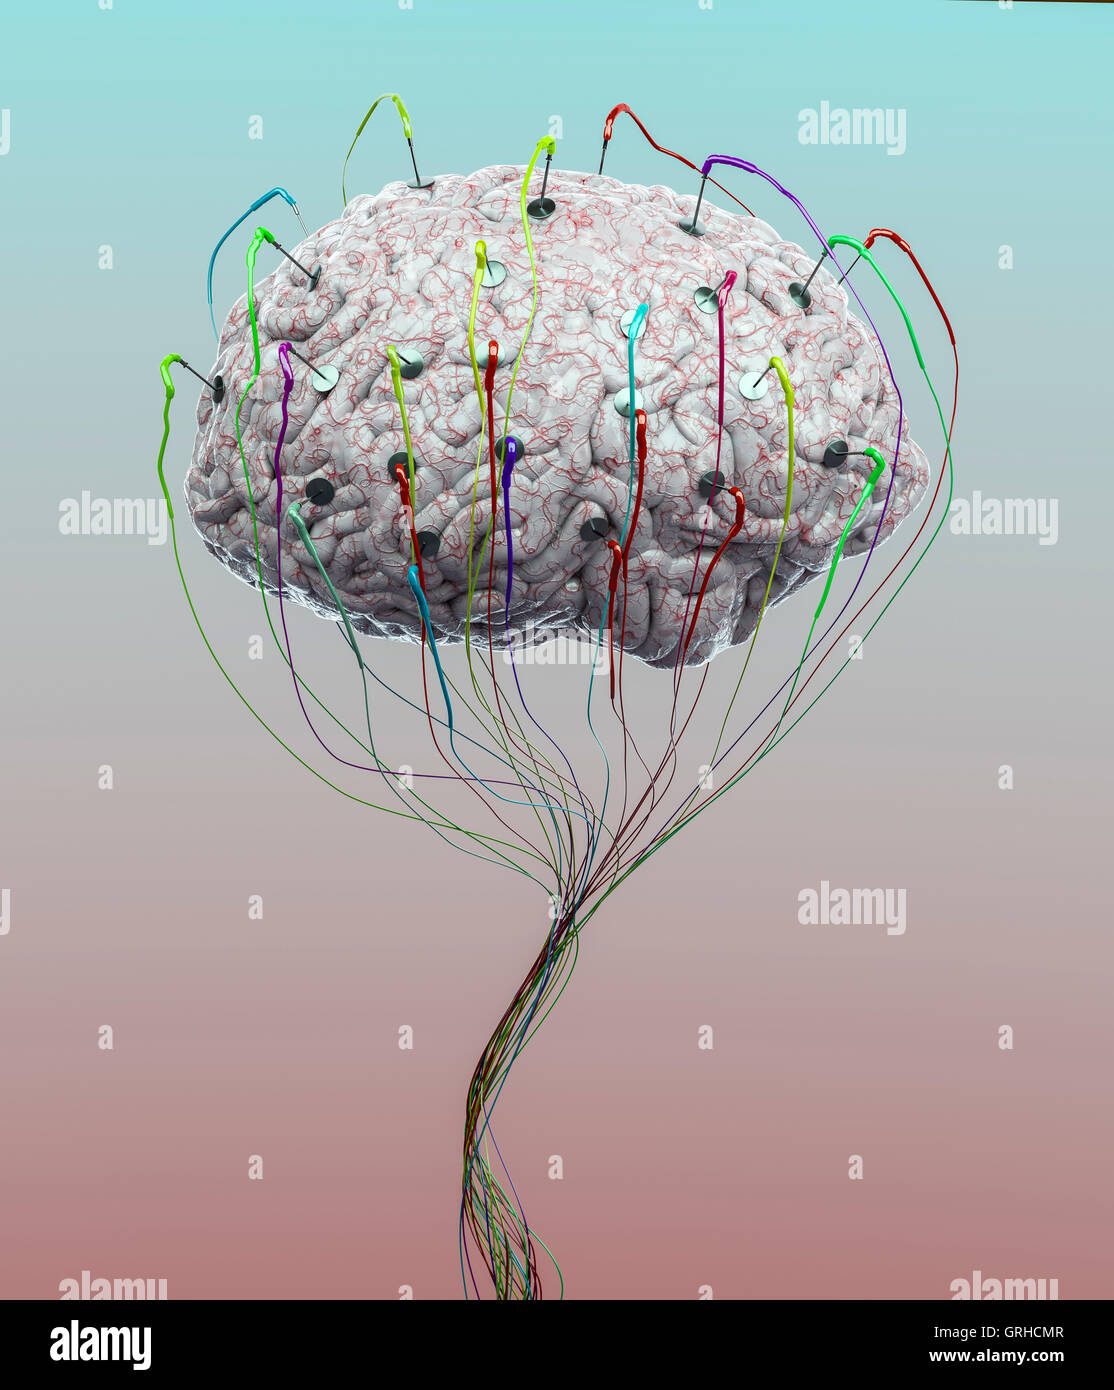 A human brain floats in the air as a technical illustration Stock Photo